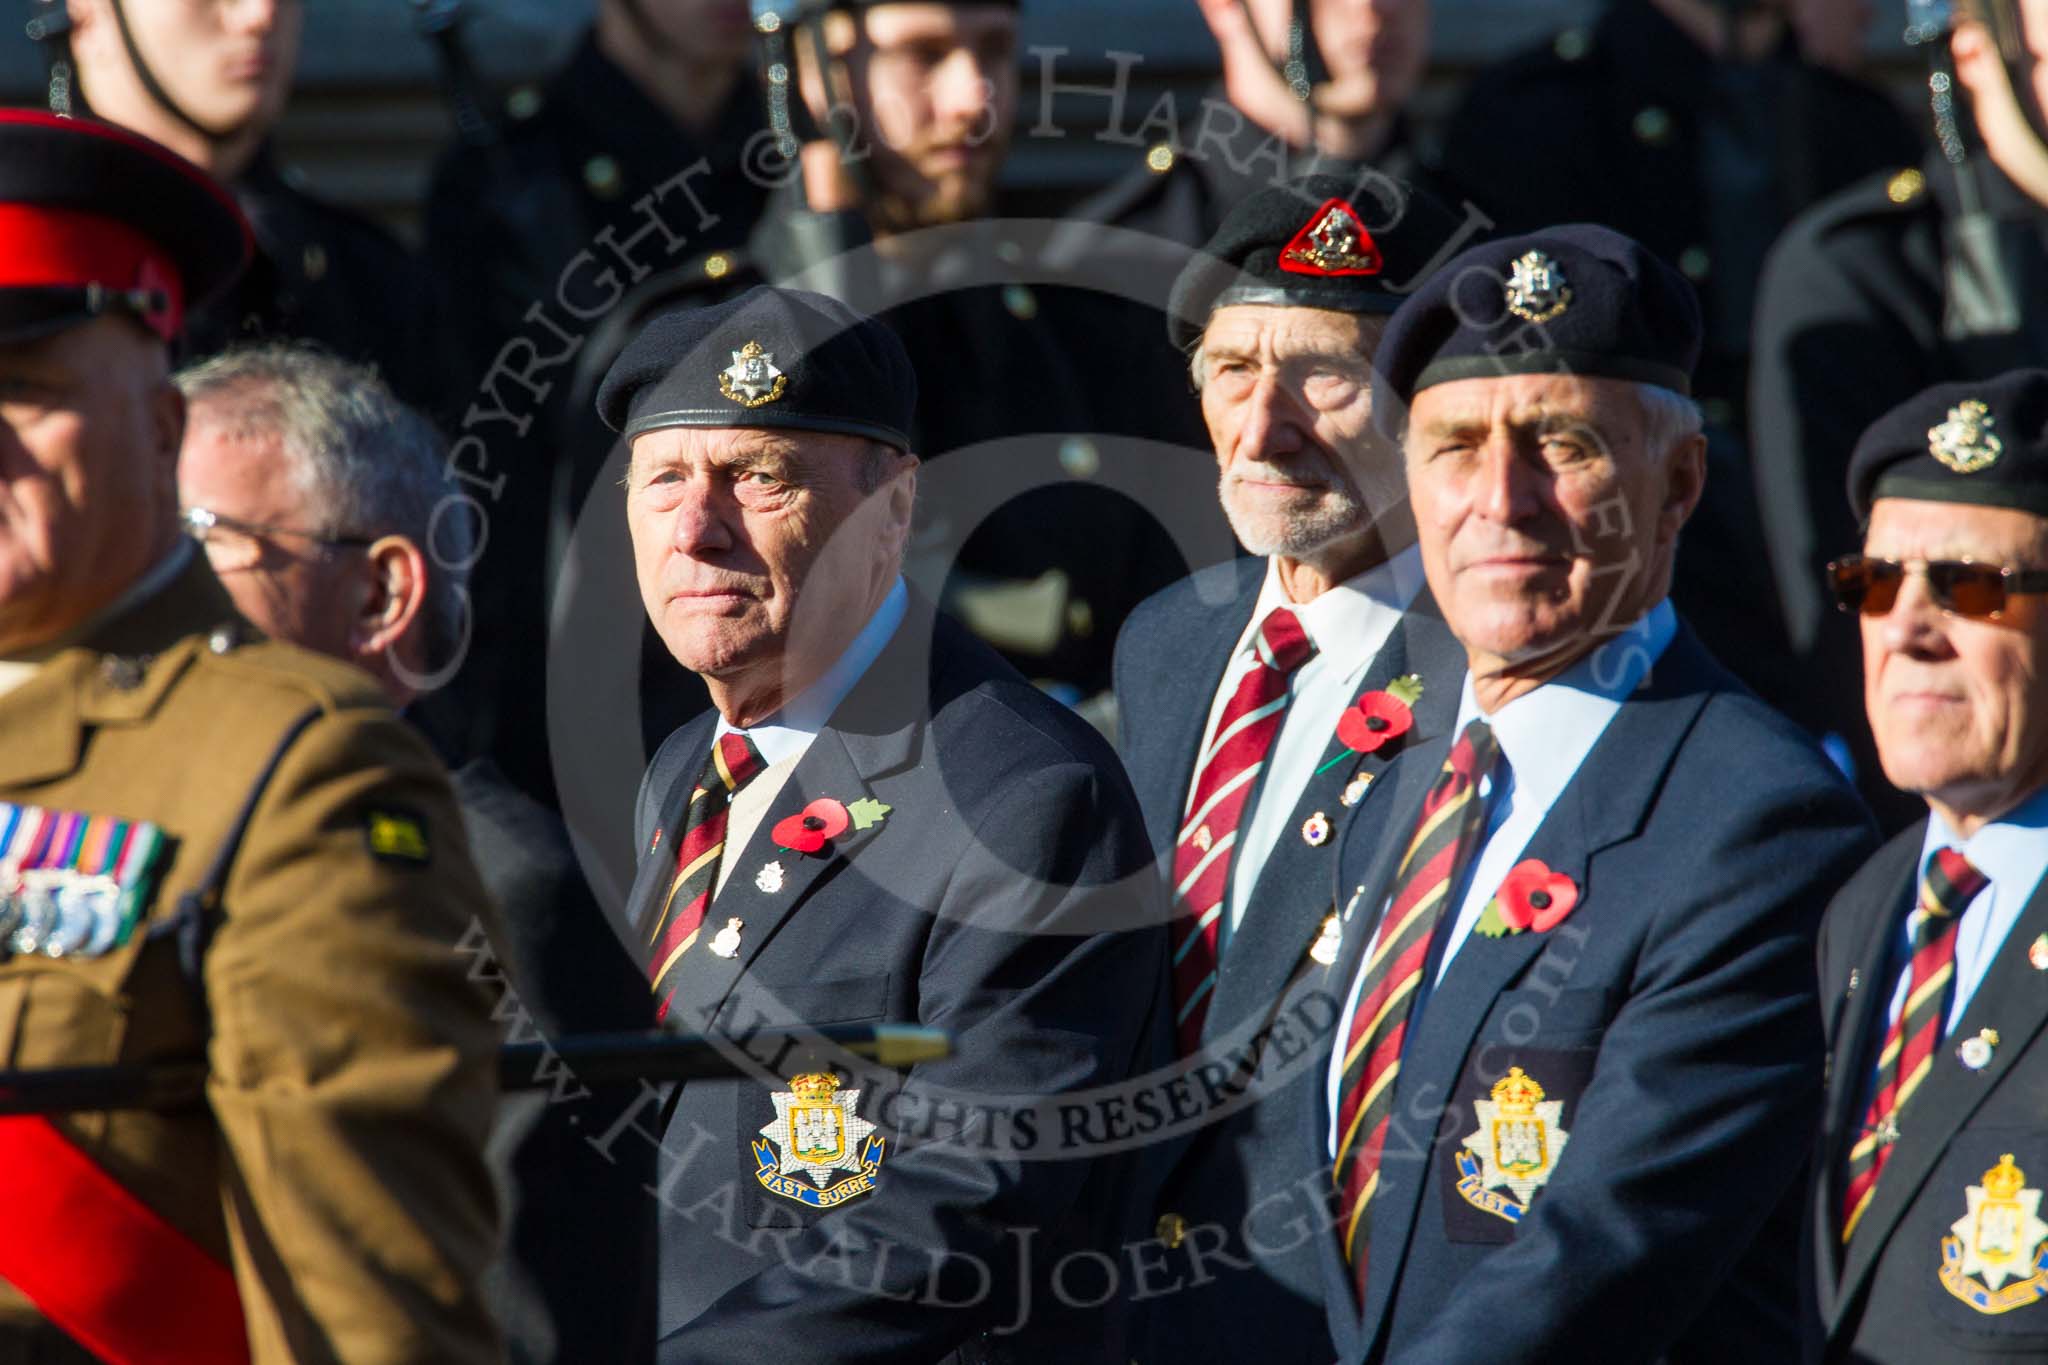 Remembrance Sunday at the Cenotaph in London 2014: Group A24 - Prince of Wales' Leinster Regiment (Royal Canadians)
Regimental Association.
Press stand opposite the Foreign Office building, Whitehall, London SW1,
London,
Greater London,
United Kingdom,
on 09 November 2014 at 12:04, image #1371